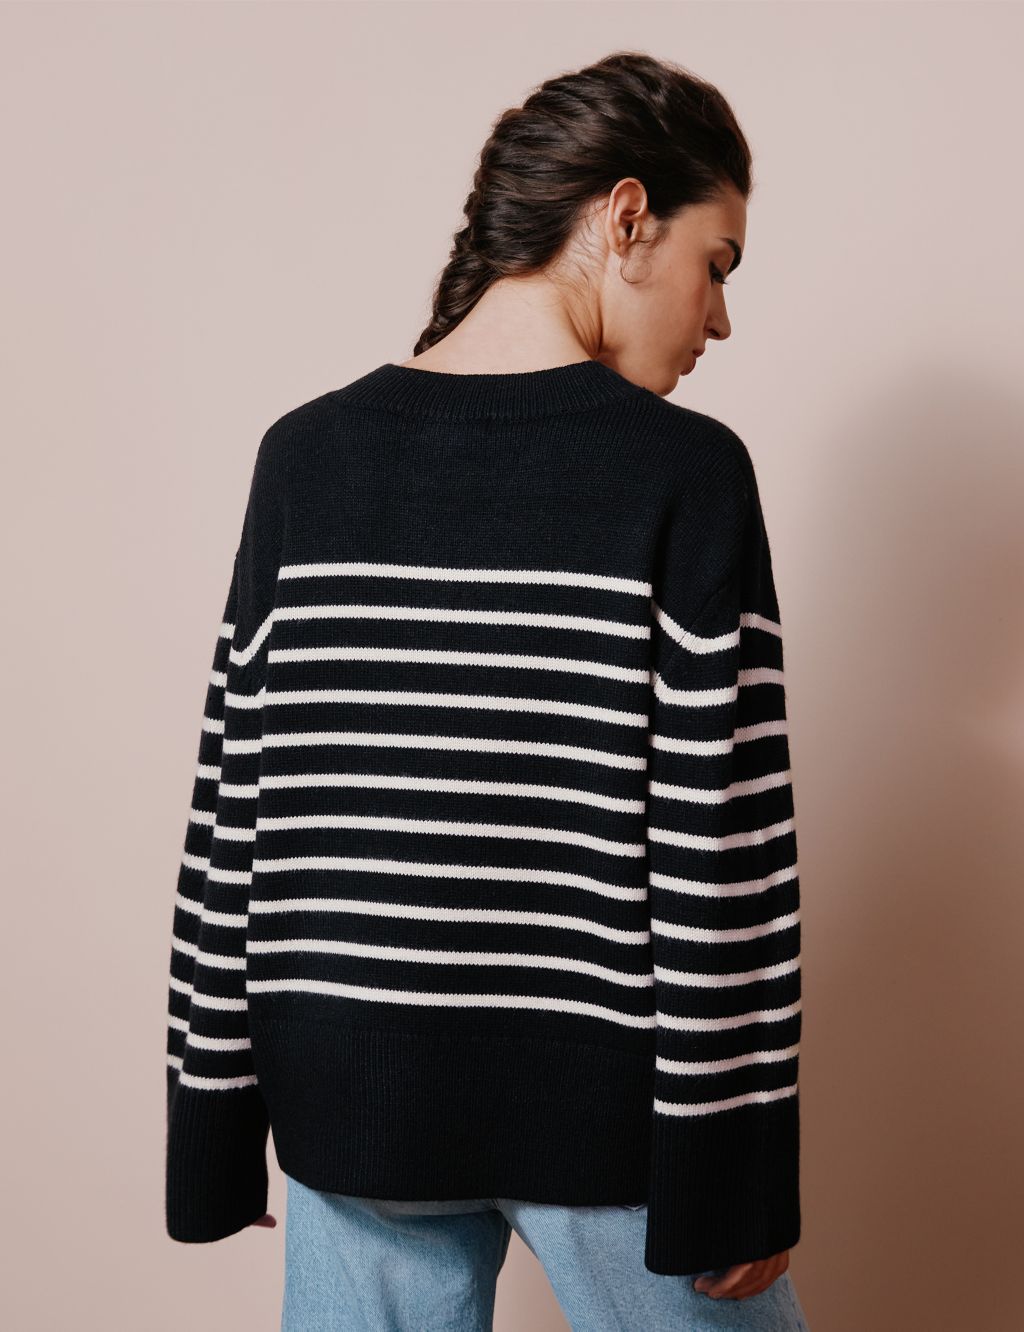 Striped V-Neck Jumper with Wool image 3